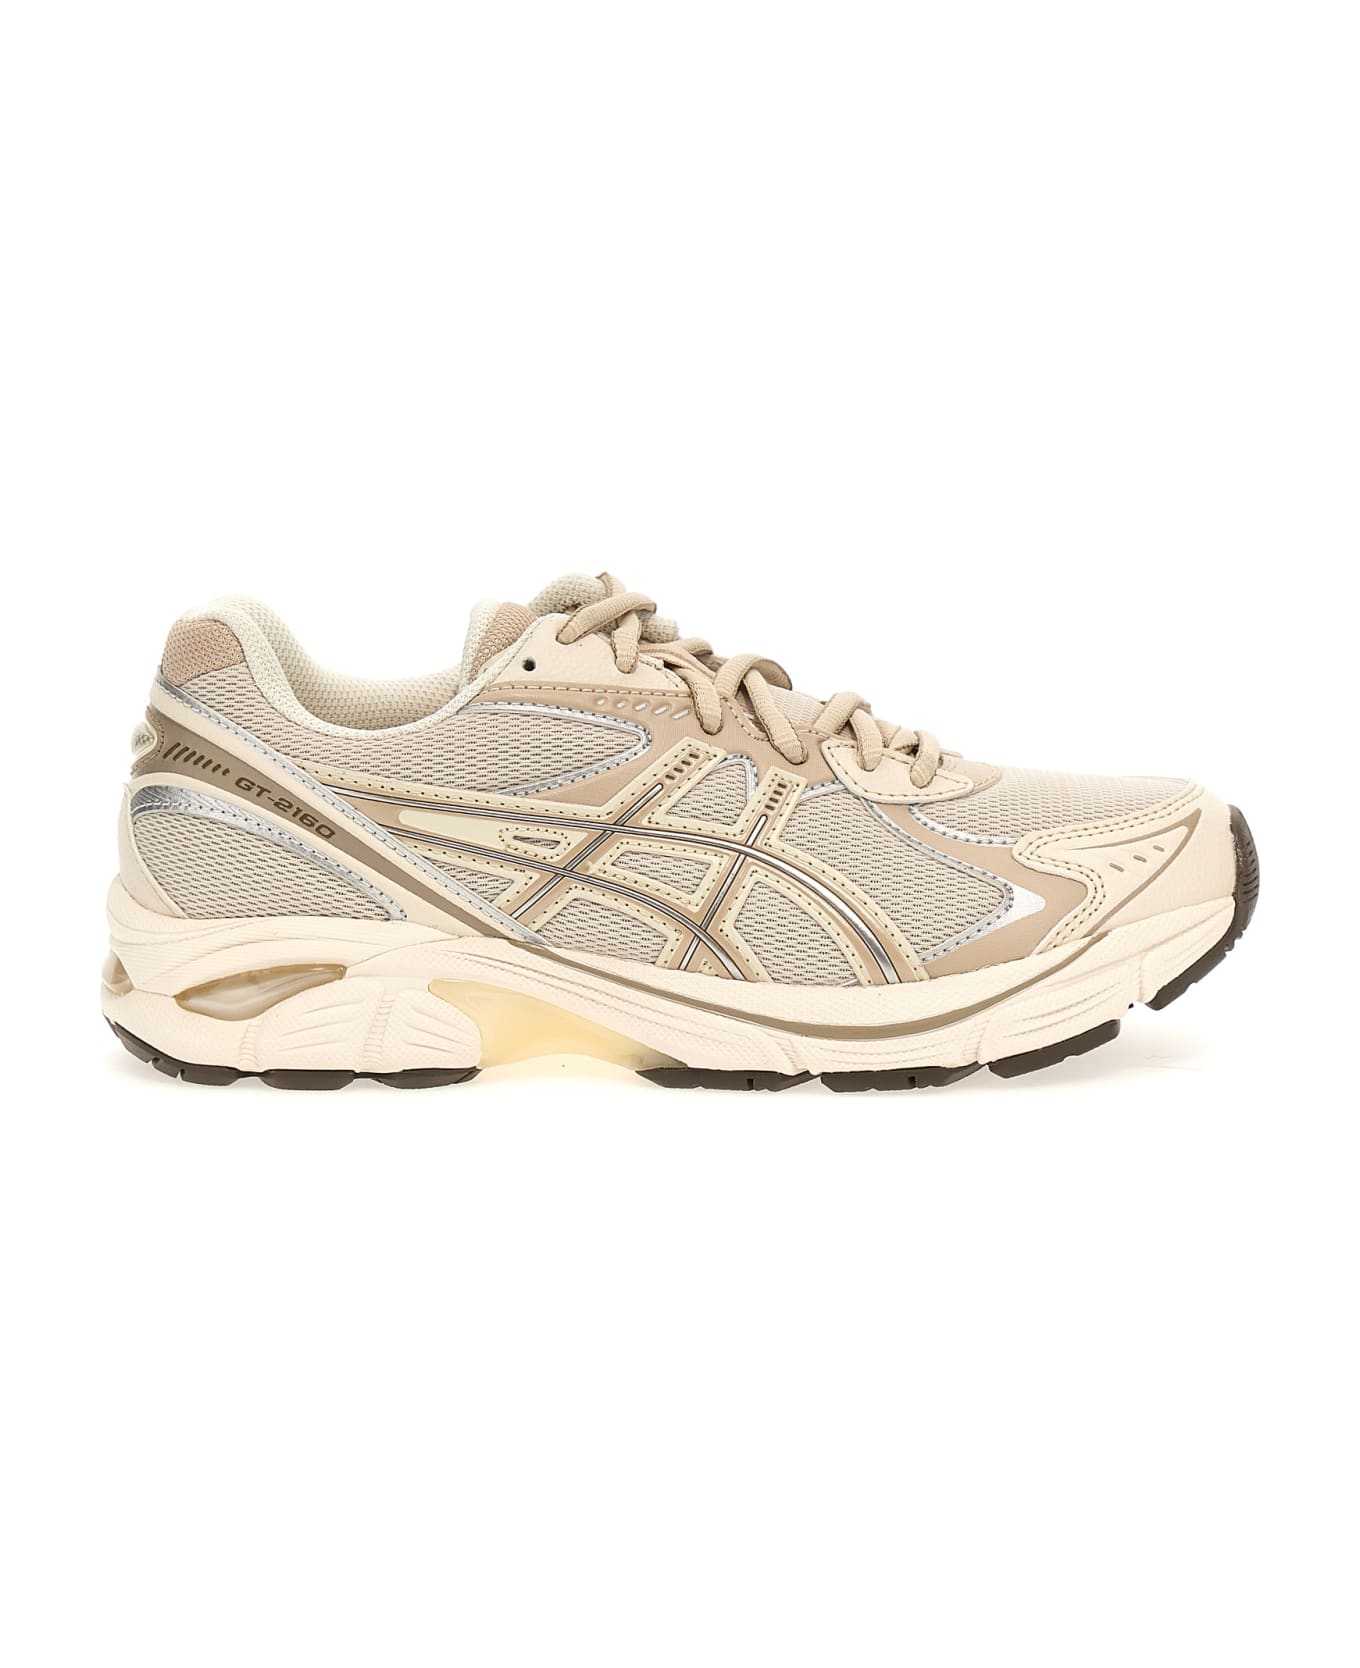 Asics 'gt-2160' Sneakers - Oatmeal/simply Taupe